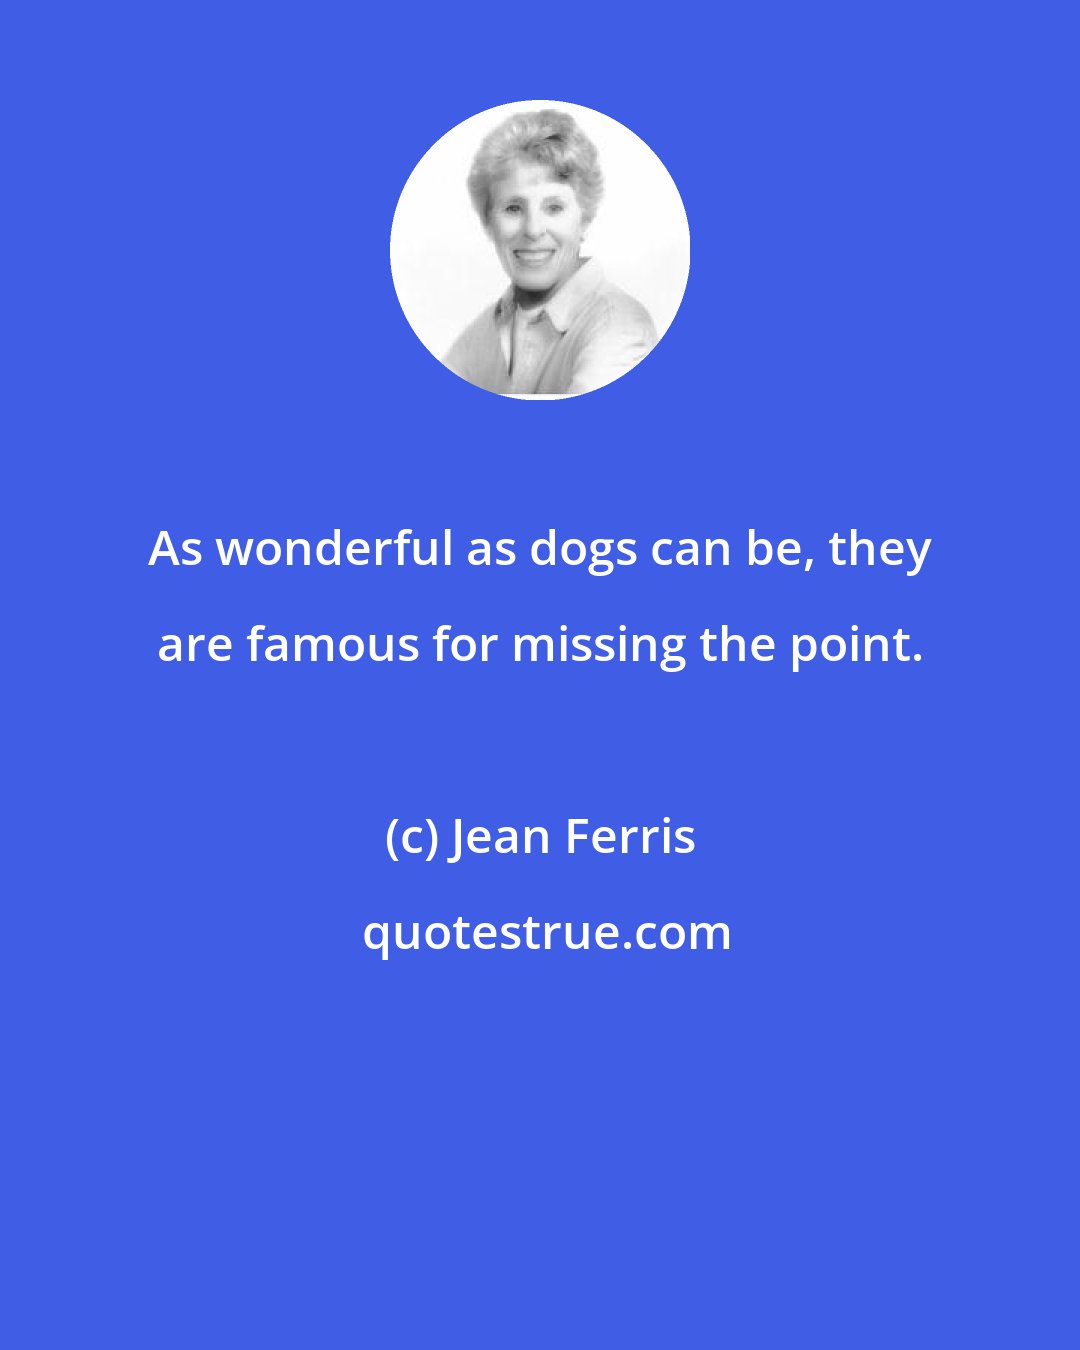 Jean Ferris: As wonderful as dogs can be, they are famous for missing the point.